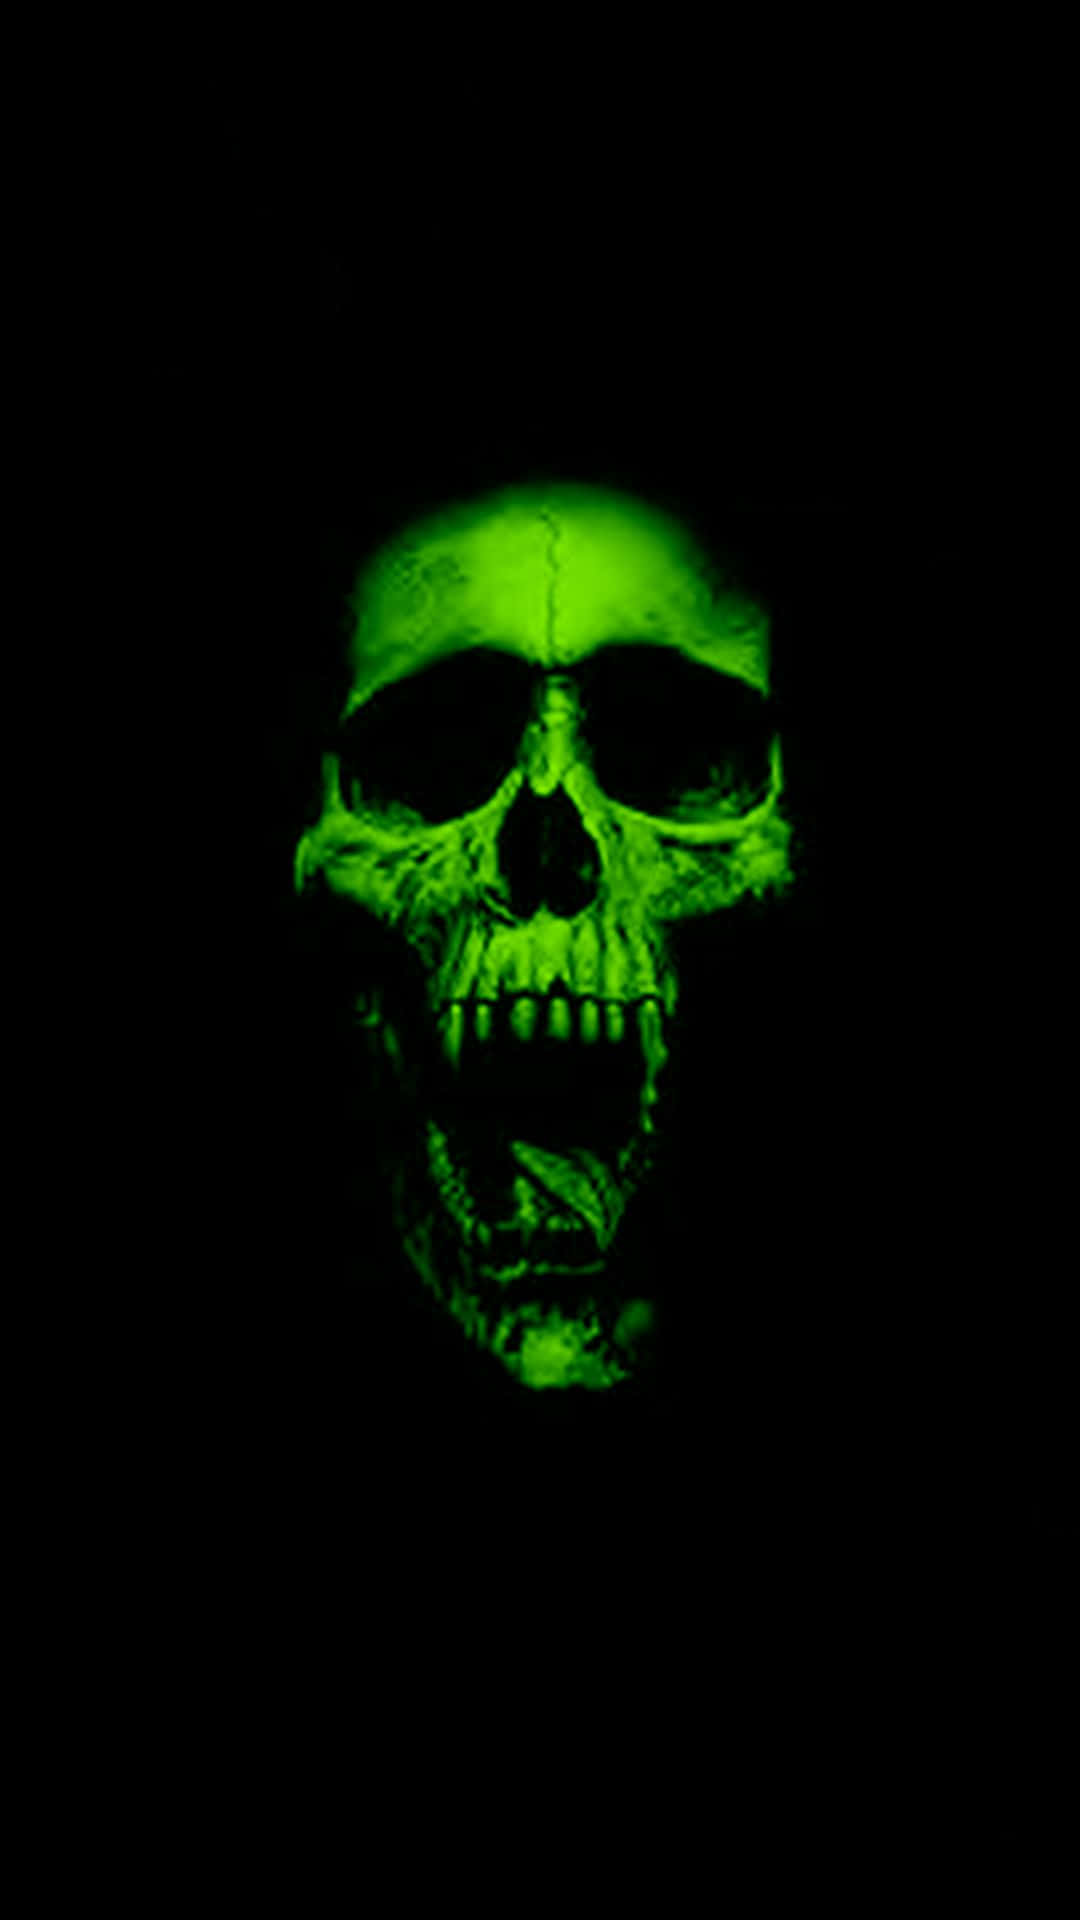 A Green Skull With Teeth On A Black Background Wallpaper